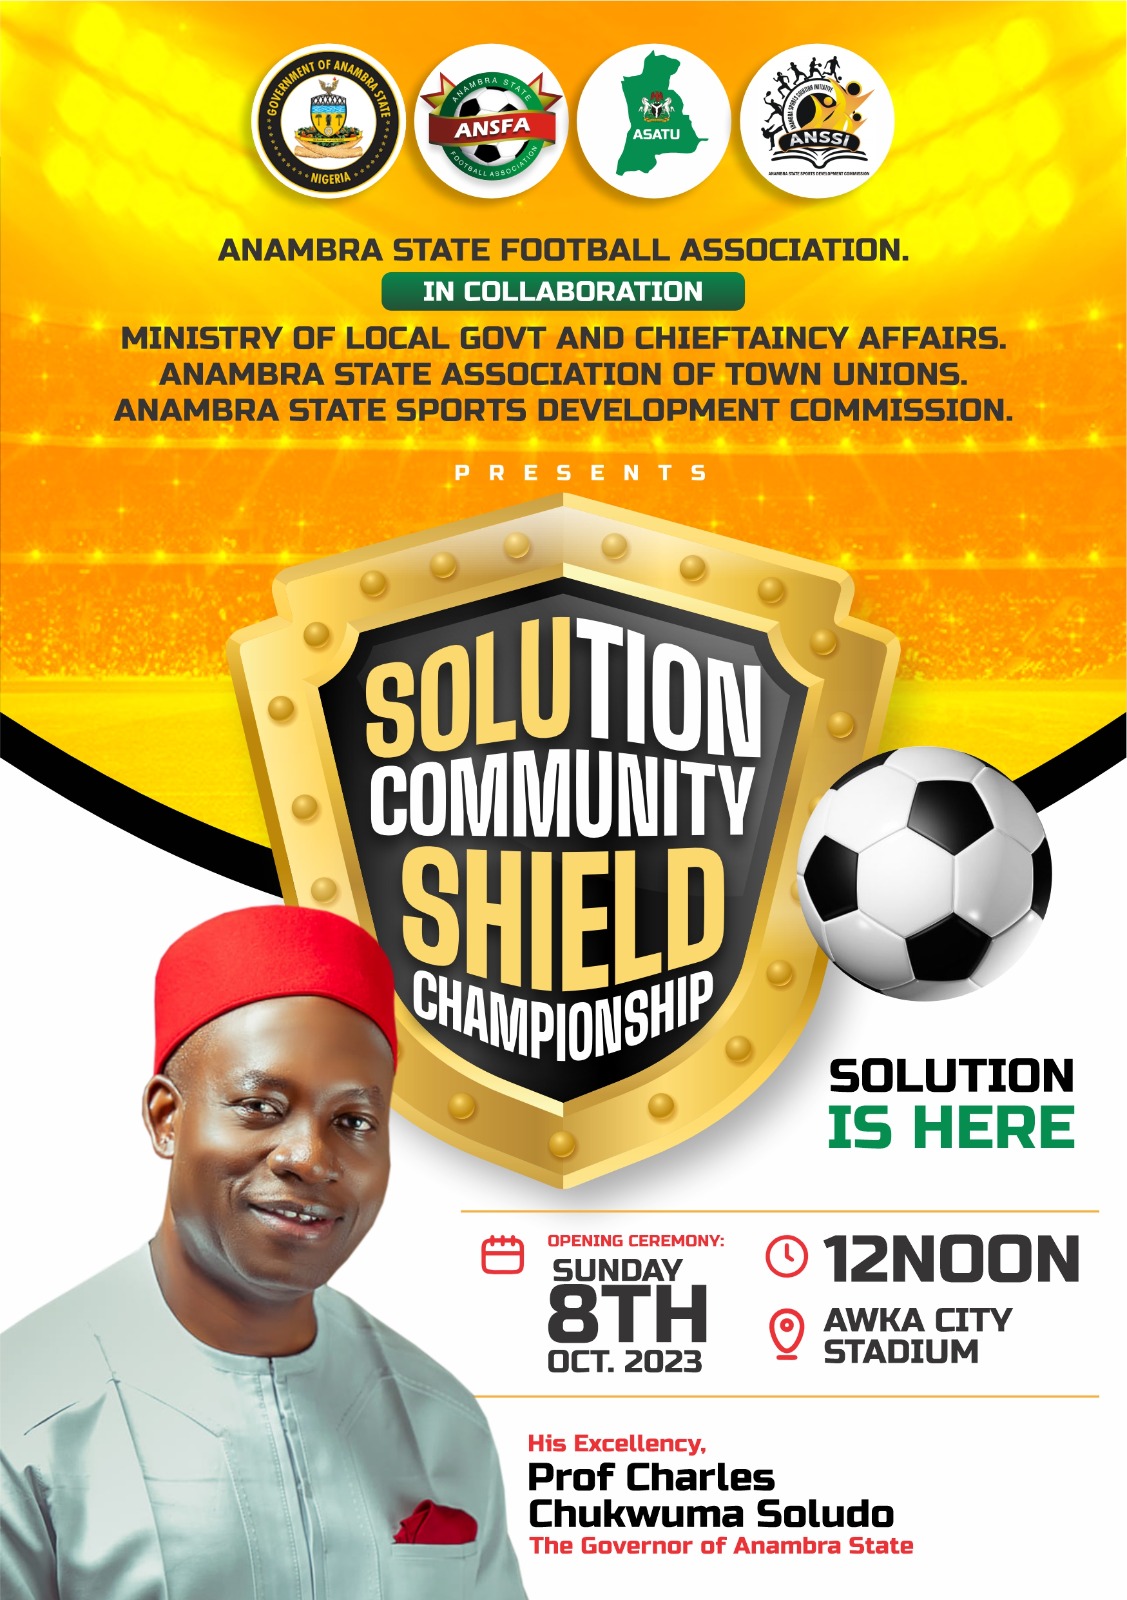 Organisers Reveal N3.5m Prize Money In Maiden Solution Community Shield Football Championship